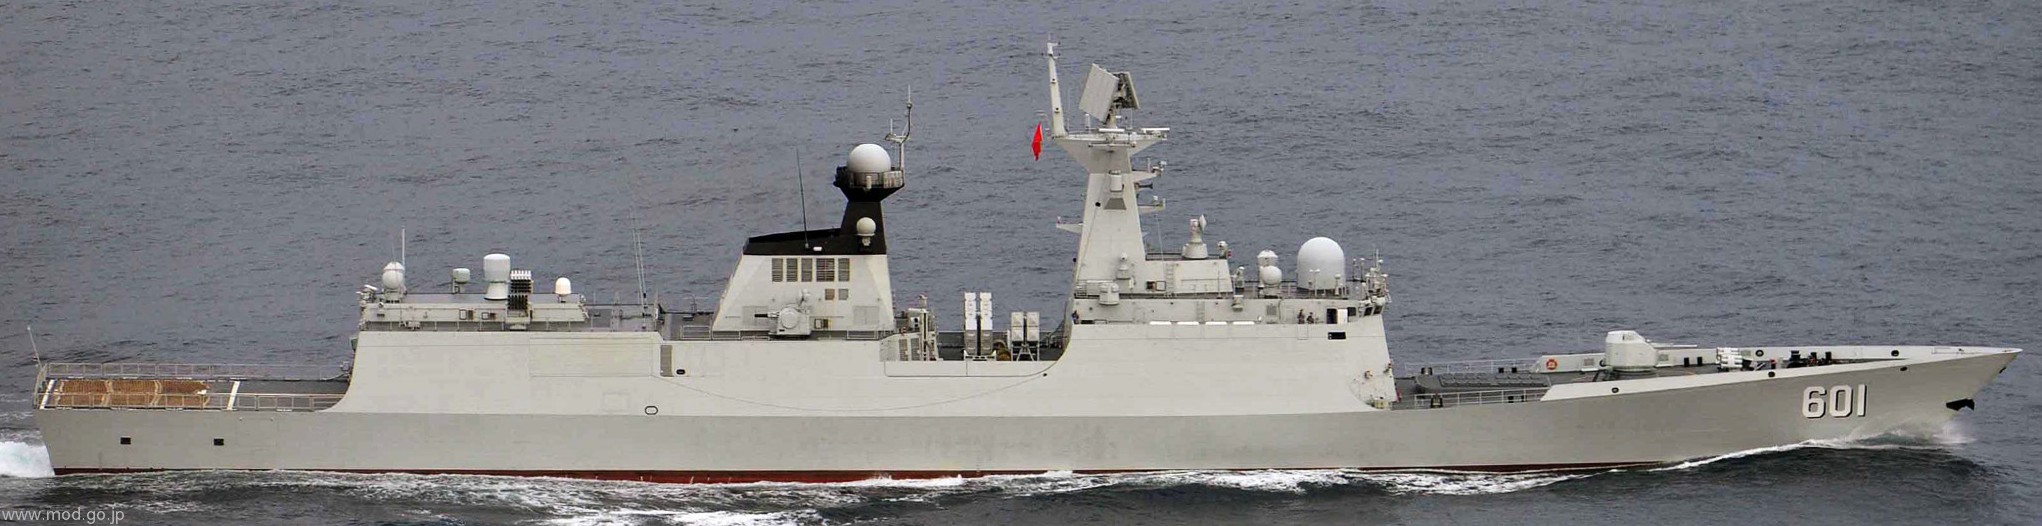 ffg-533 601 plans nantong type 054a jiangkai ii class guided missile frigate china people's liberation army navy 02